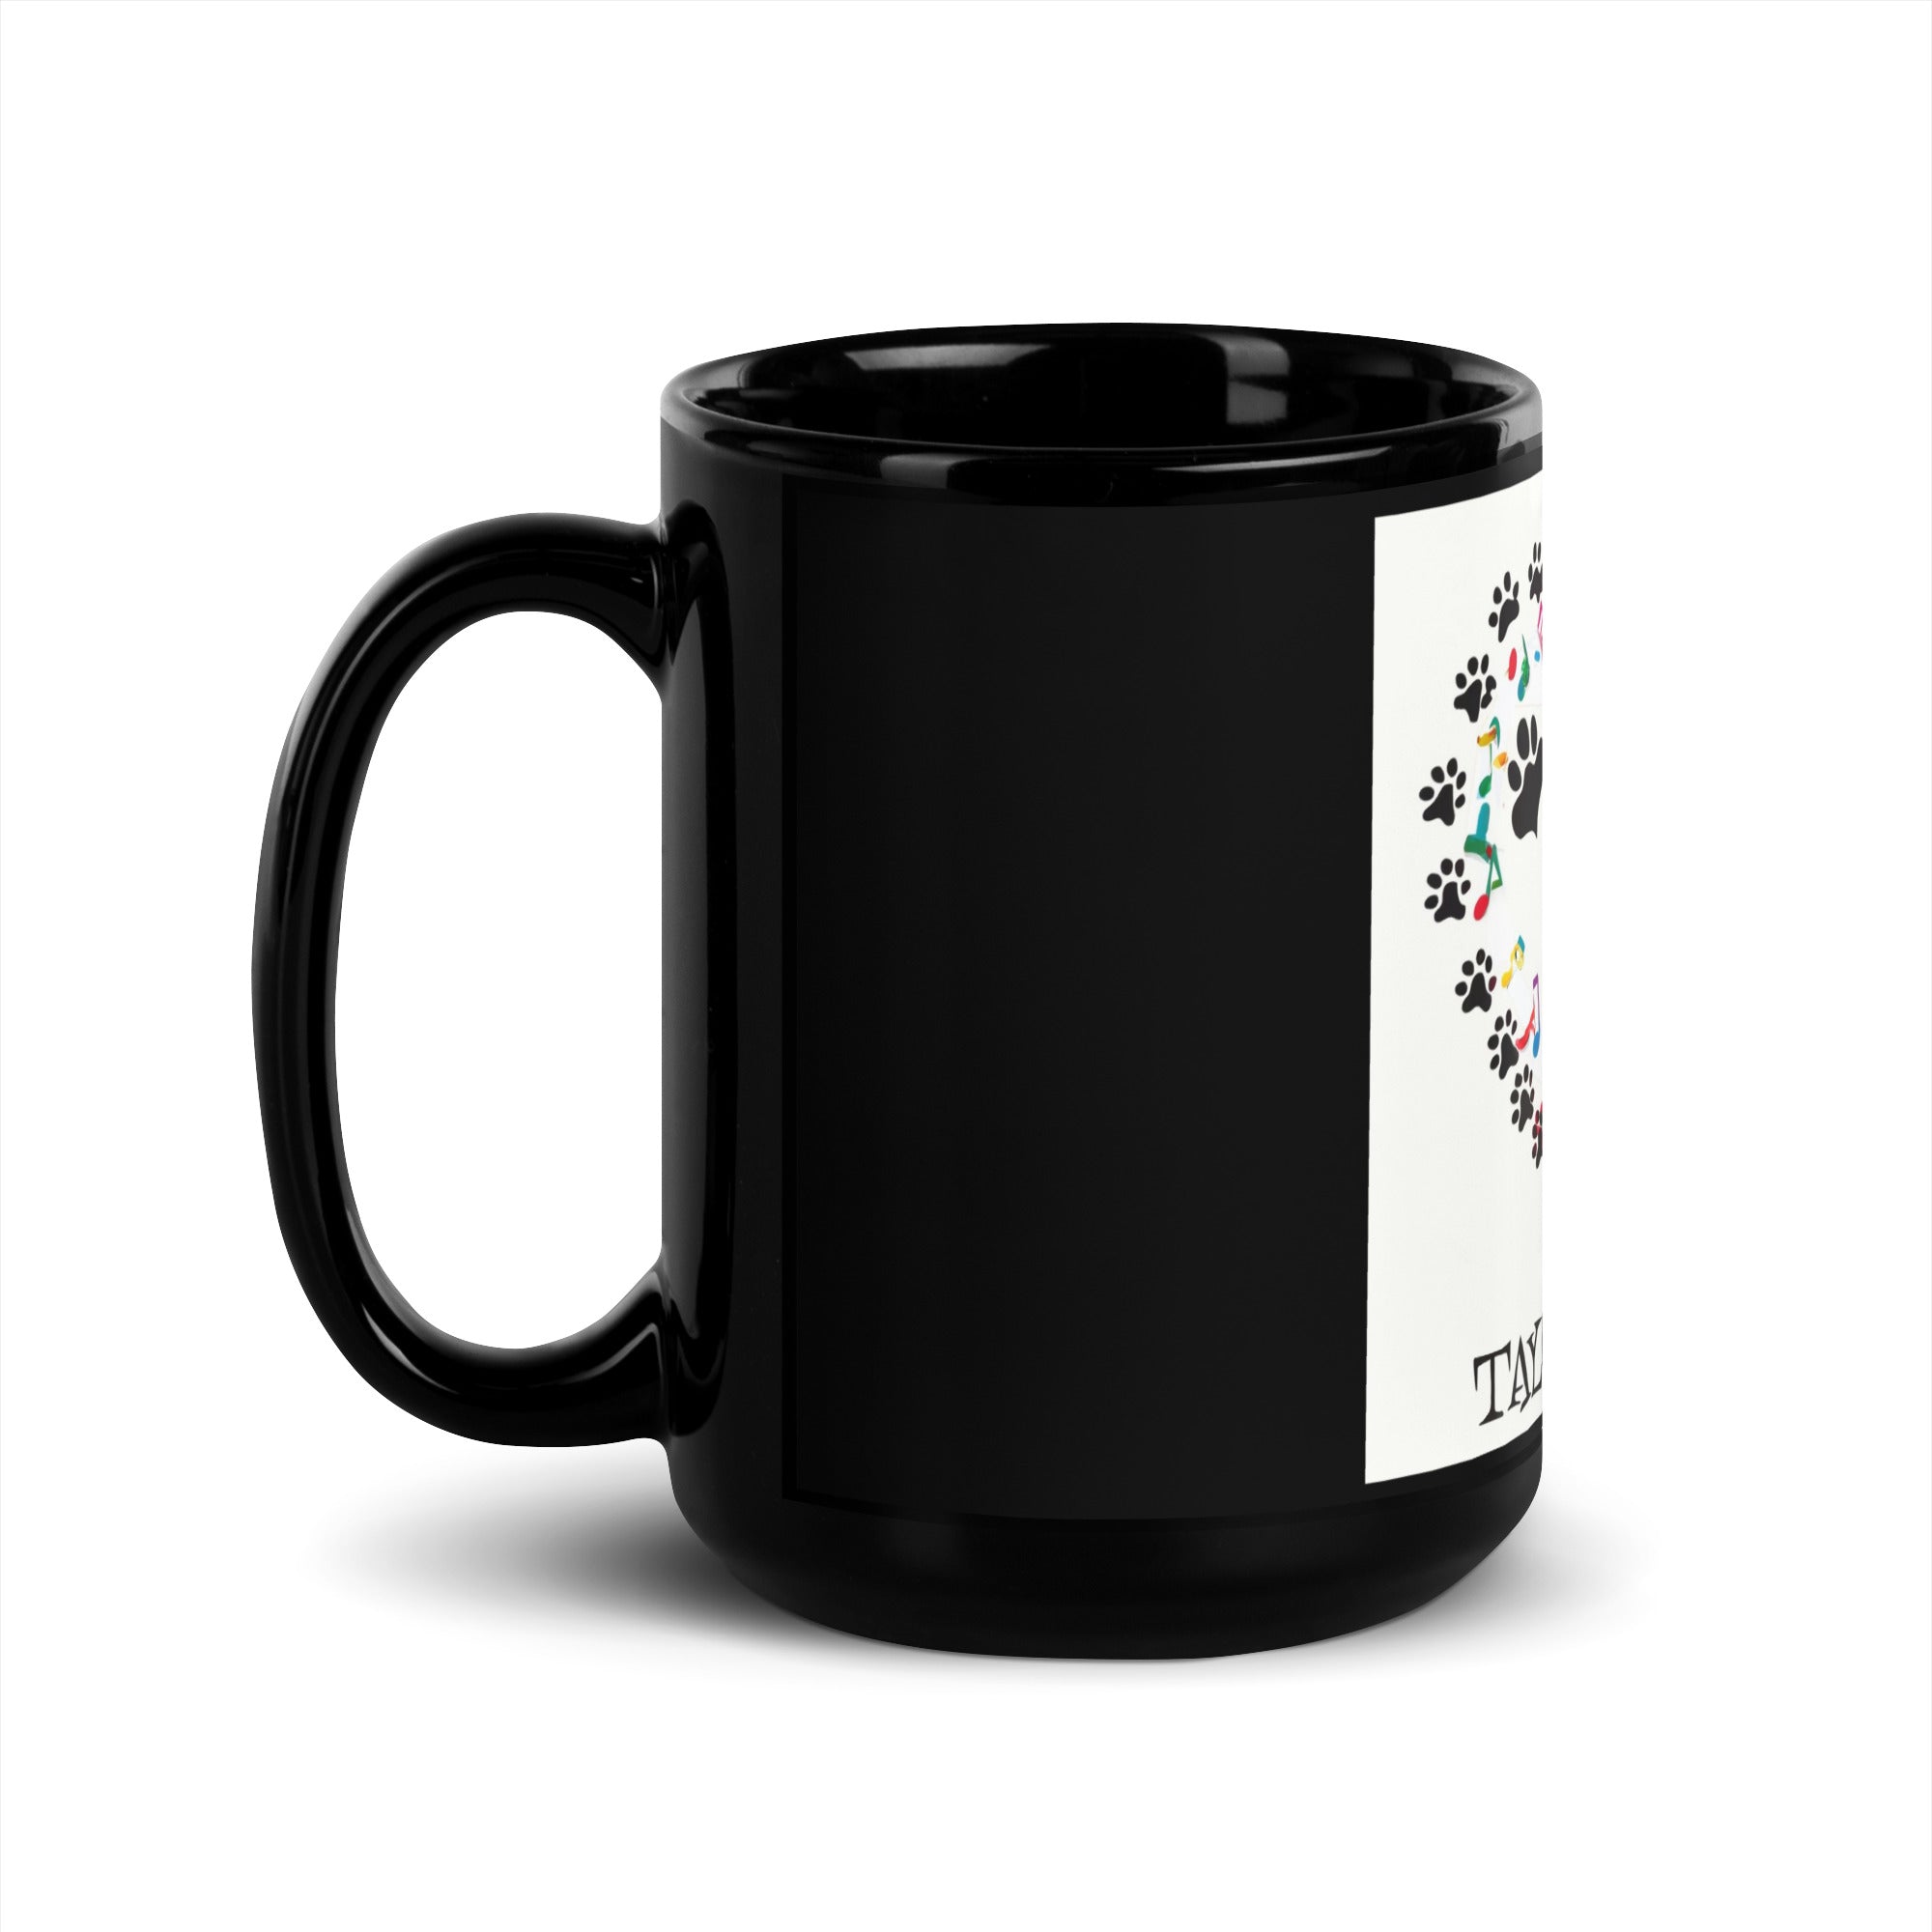 Black Glossy Mug. A Purr-fect Blend of Pet Love and Taylor Admiration!